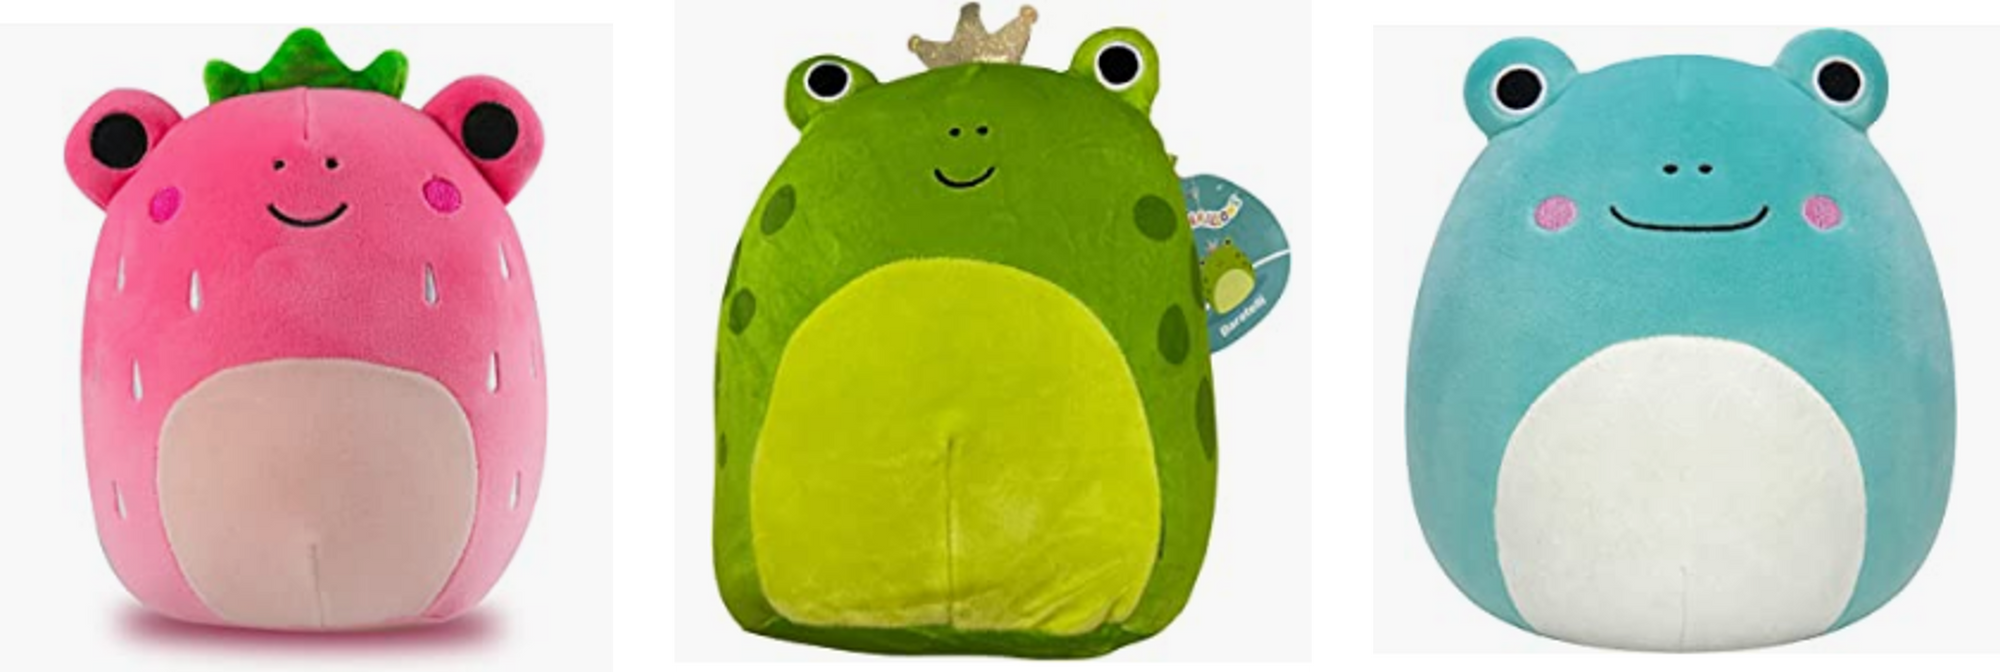 Images of our favorite froggie squishmallows.